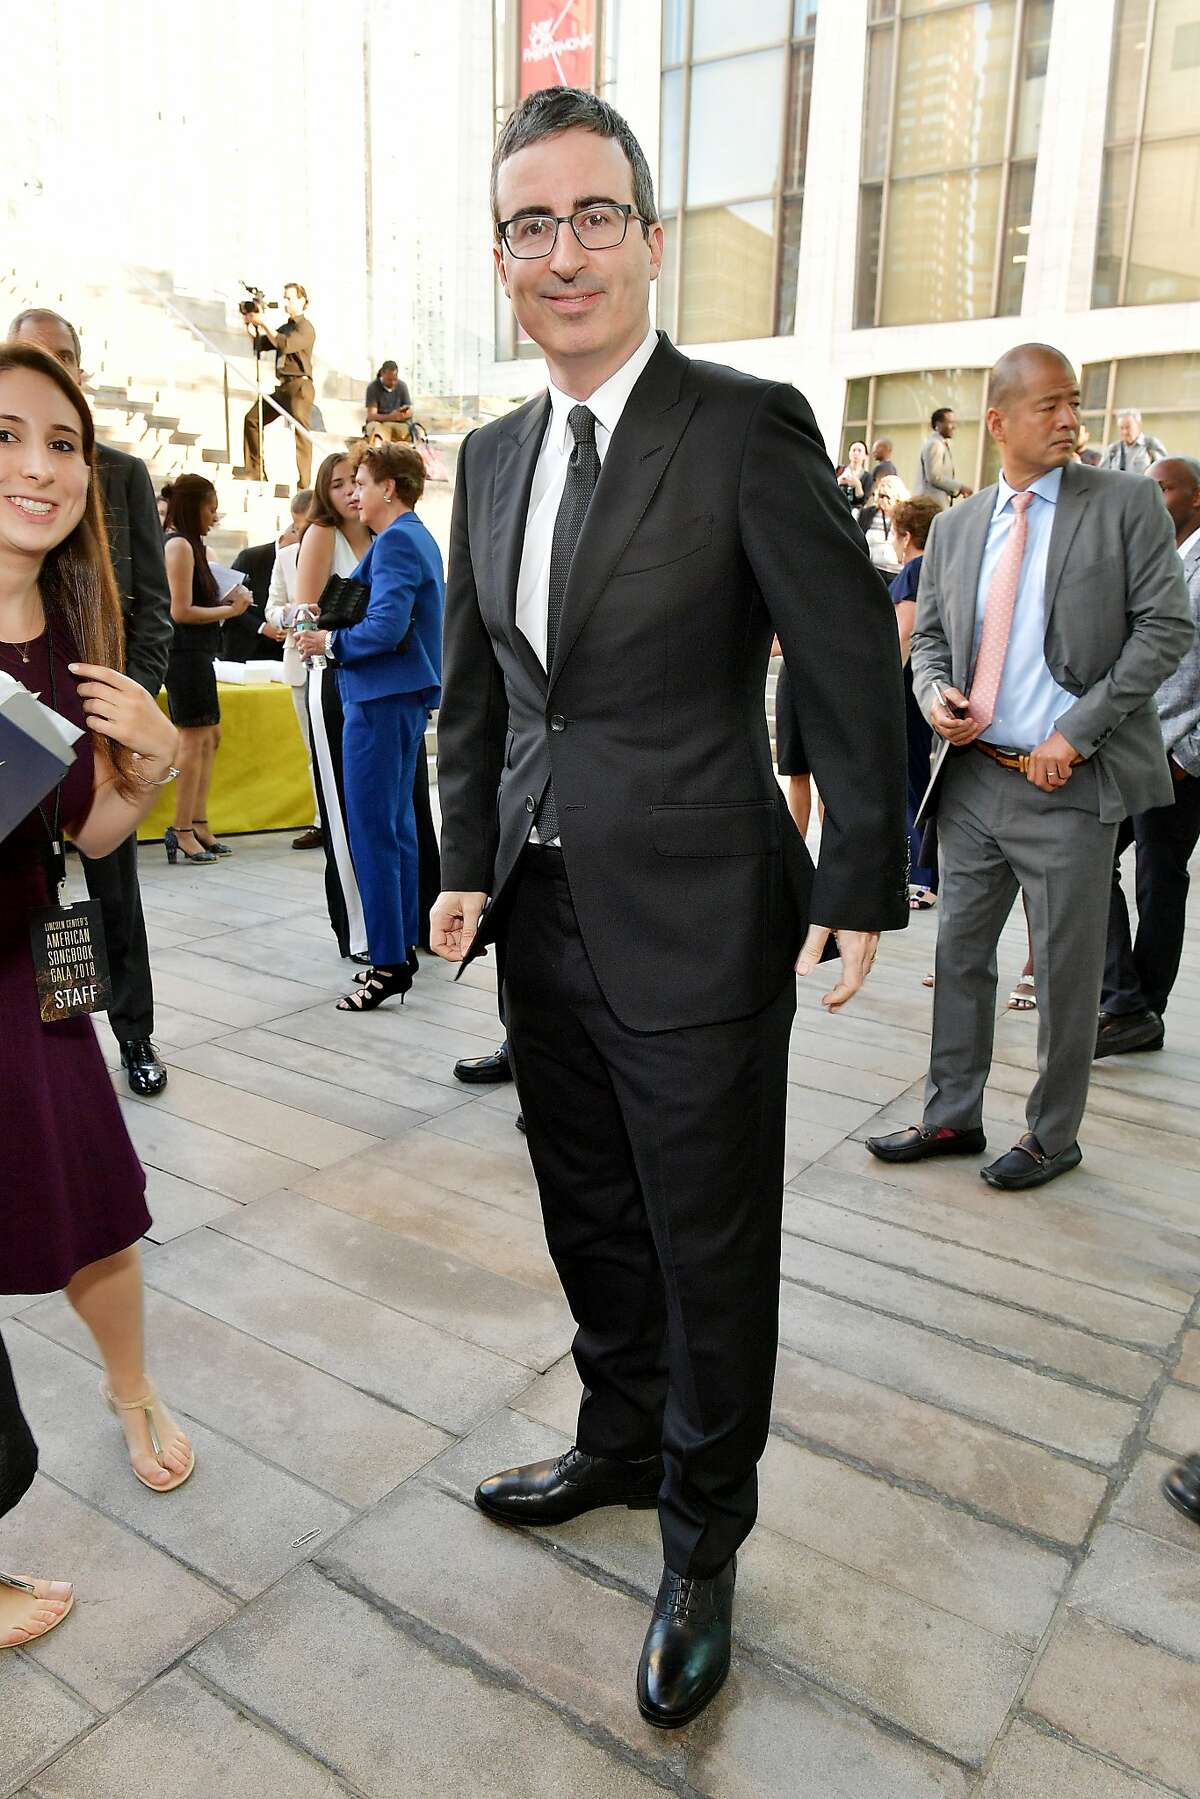 Comedian John Oliver attends Lincoln Center's American Songbook Gala at Alice Tully Hall on May 29, 2018 in New York City.  “Yeah, that was Rhode Island’s Democratic party chairman pledging delegates while standing next to a calamari ninja. I had no idea that calamari was Rhode Island’s state official appetizer. It might be the first thing I’ve learned about that state that I’ve actually liked. Aside of course, it doesn’t include the city of Danbury, Connecticut." - John Oliver, "Last Week Tonight With John Oliver," August 23, 2020